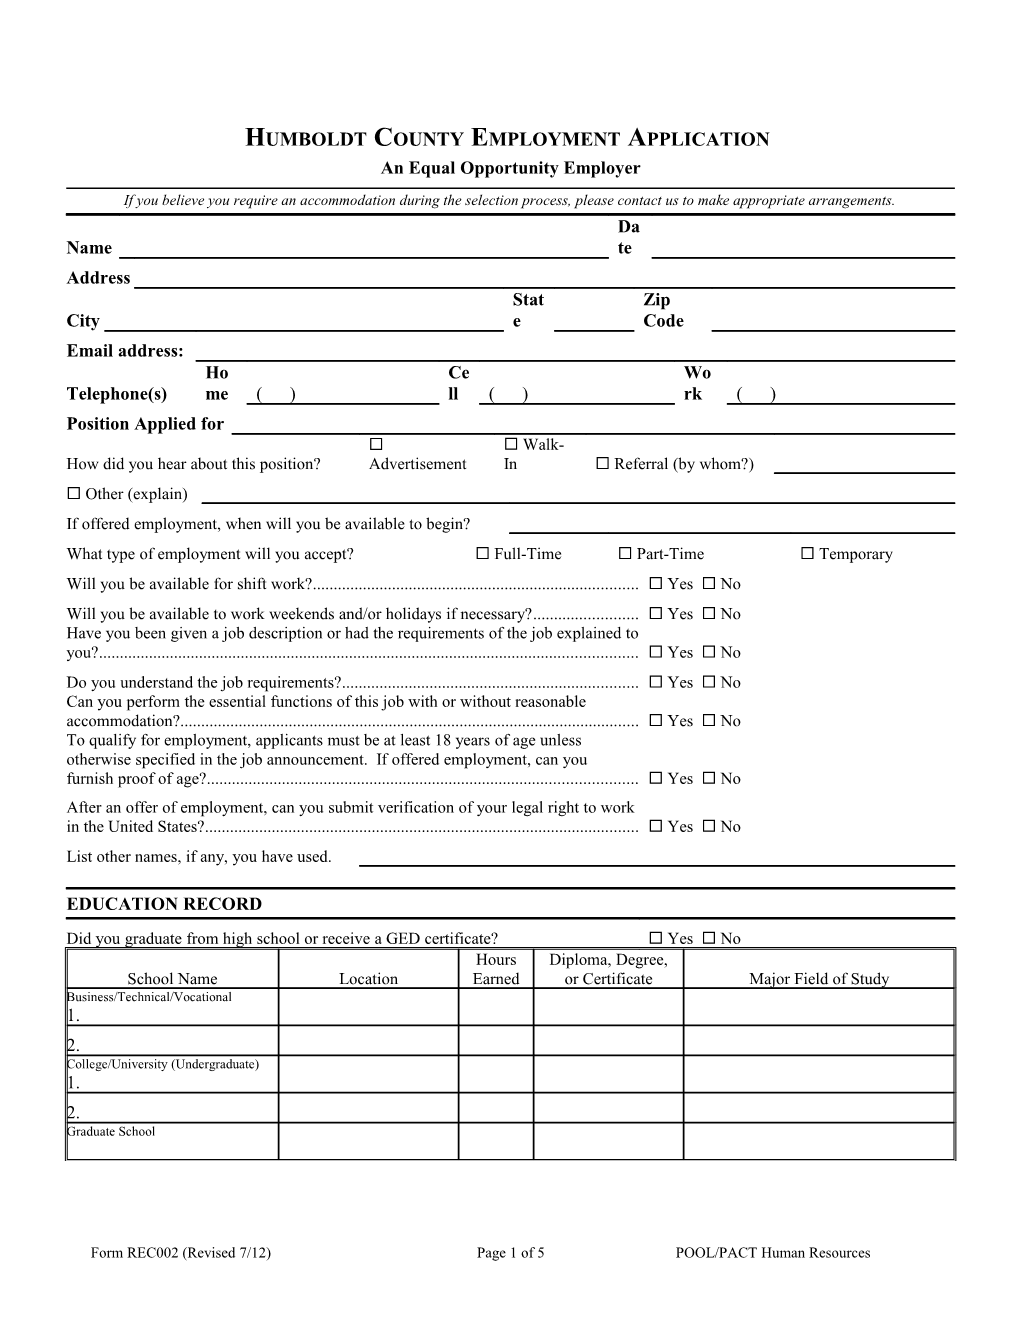 Form REC002 (Revised 7/12)Page 1 of 5POOL/PACT Human Resources